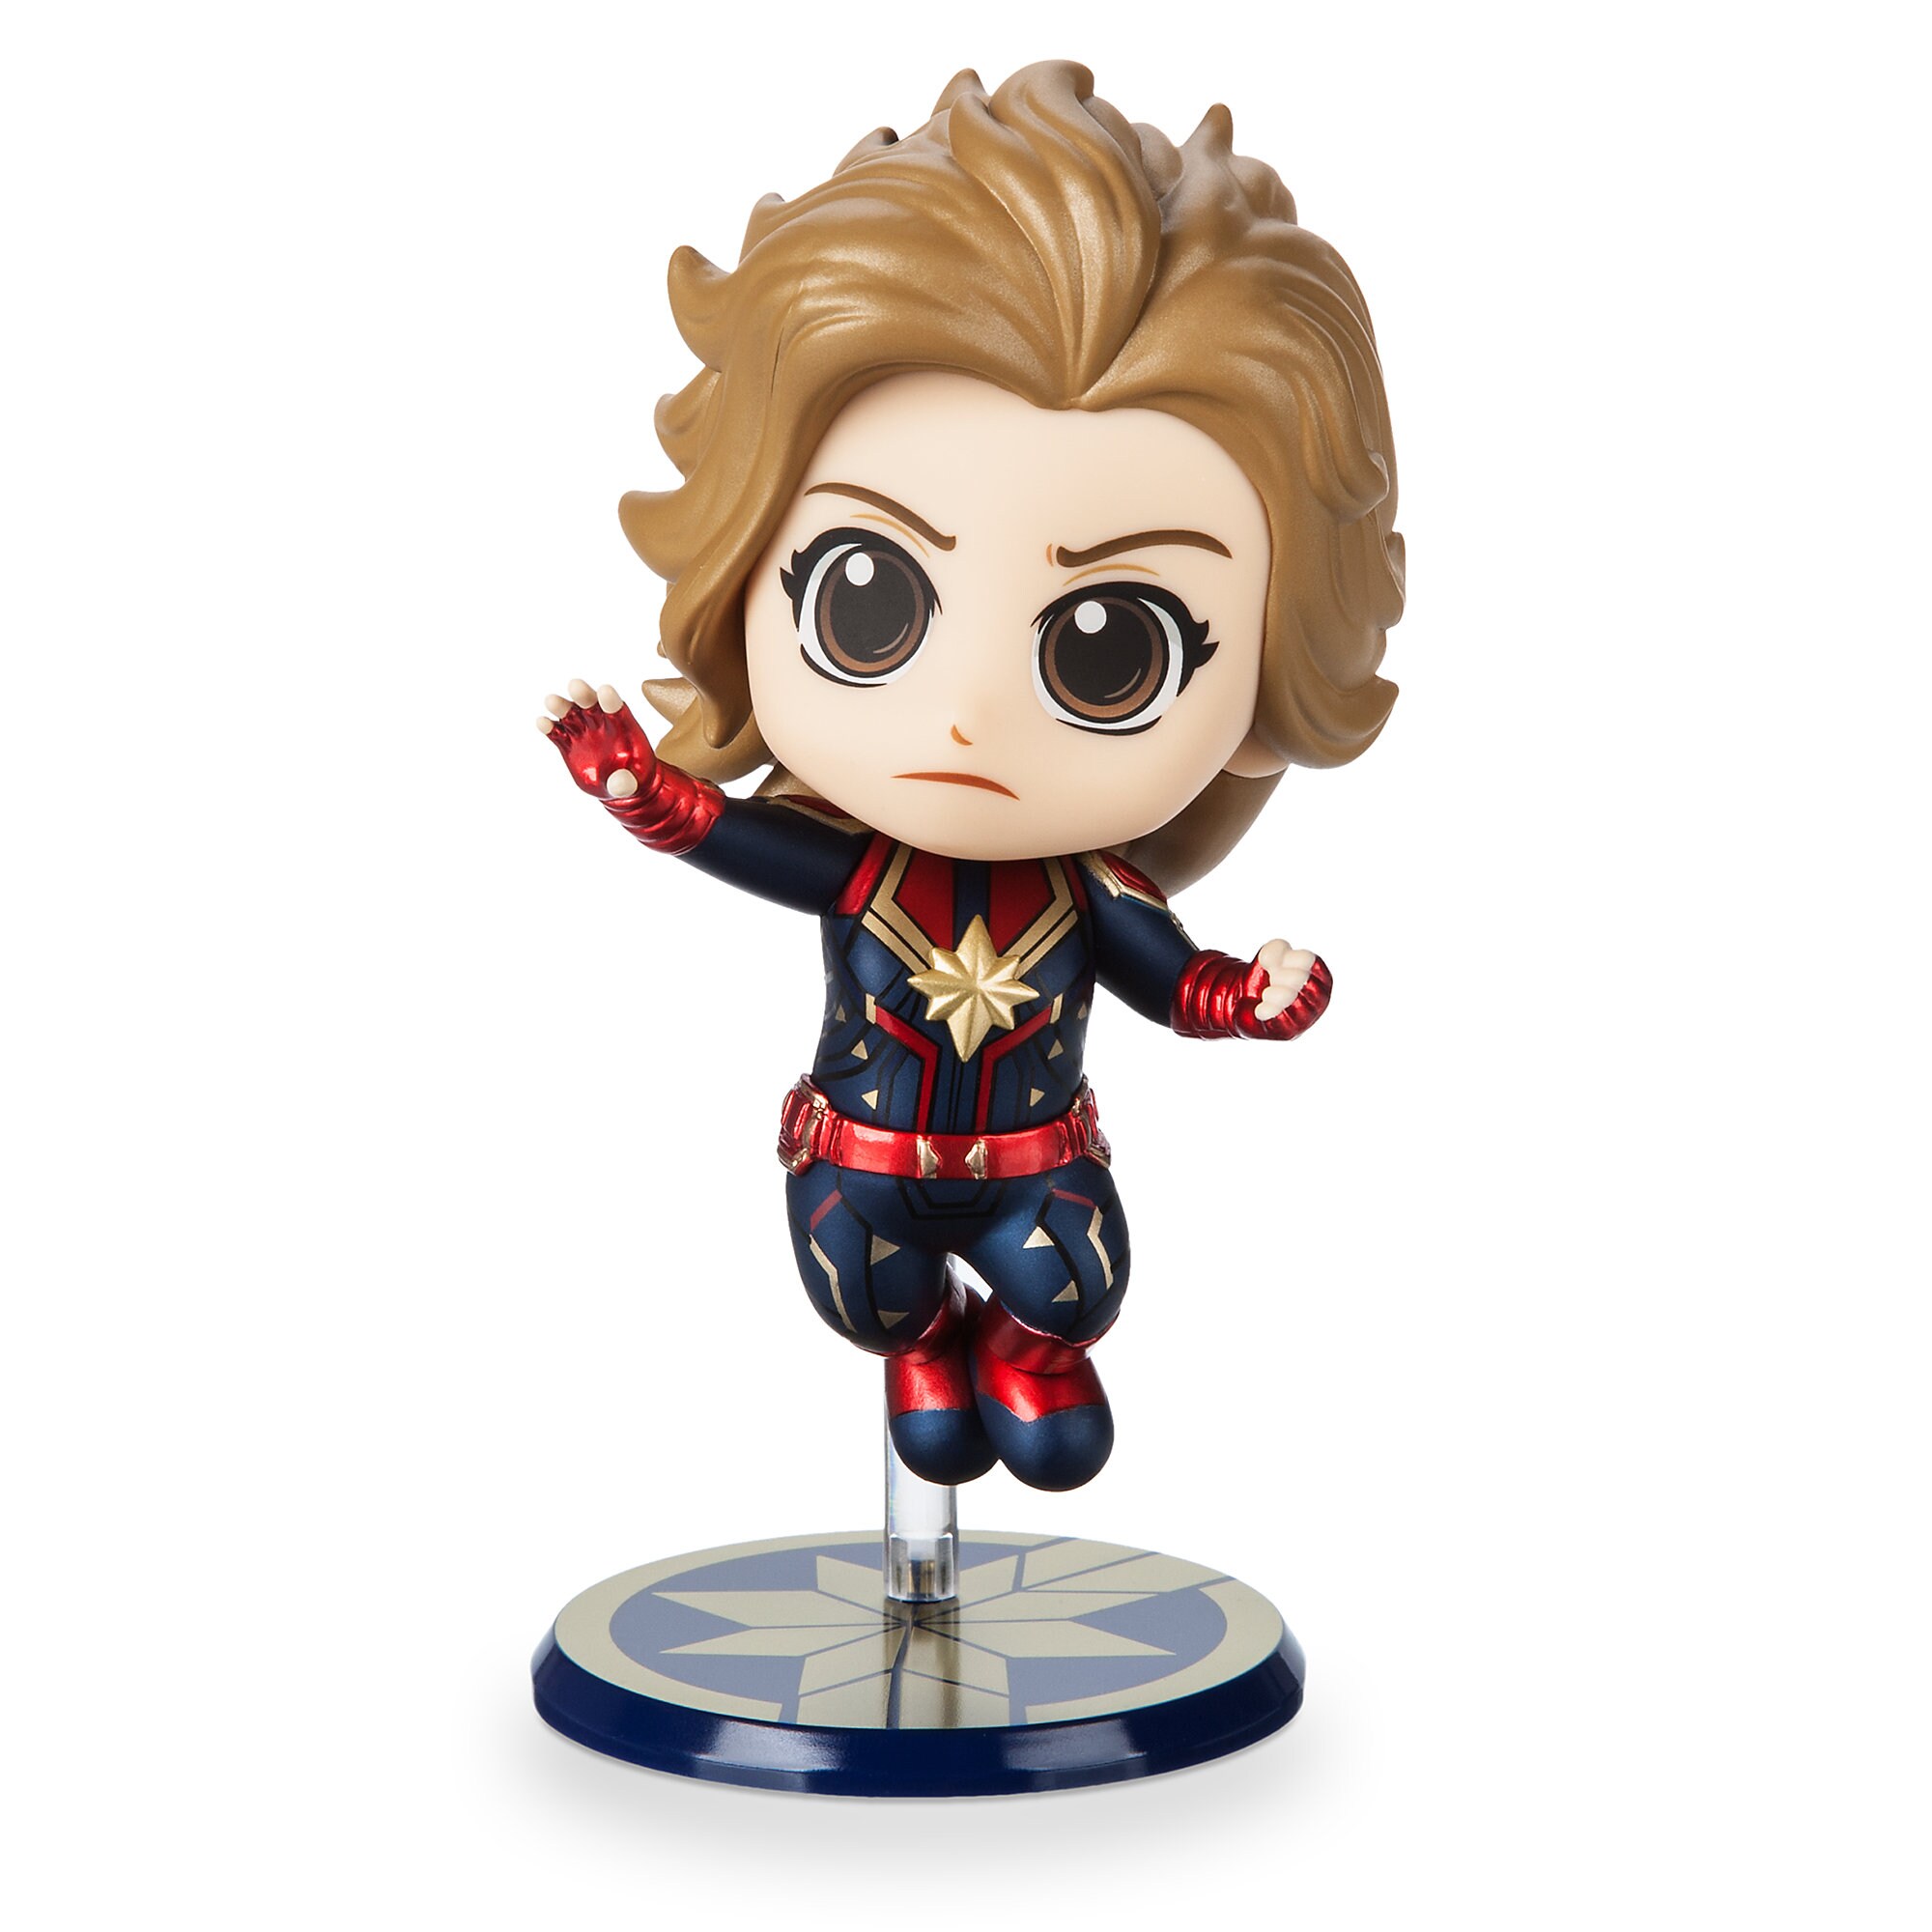 Marvel's Captain Marvel Cosbaby Bobble-Head Figure by Hot Toys - Flying Version